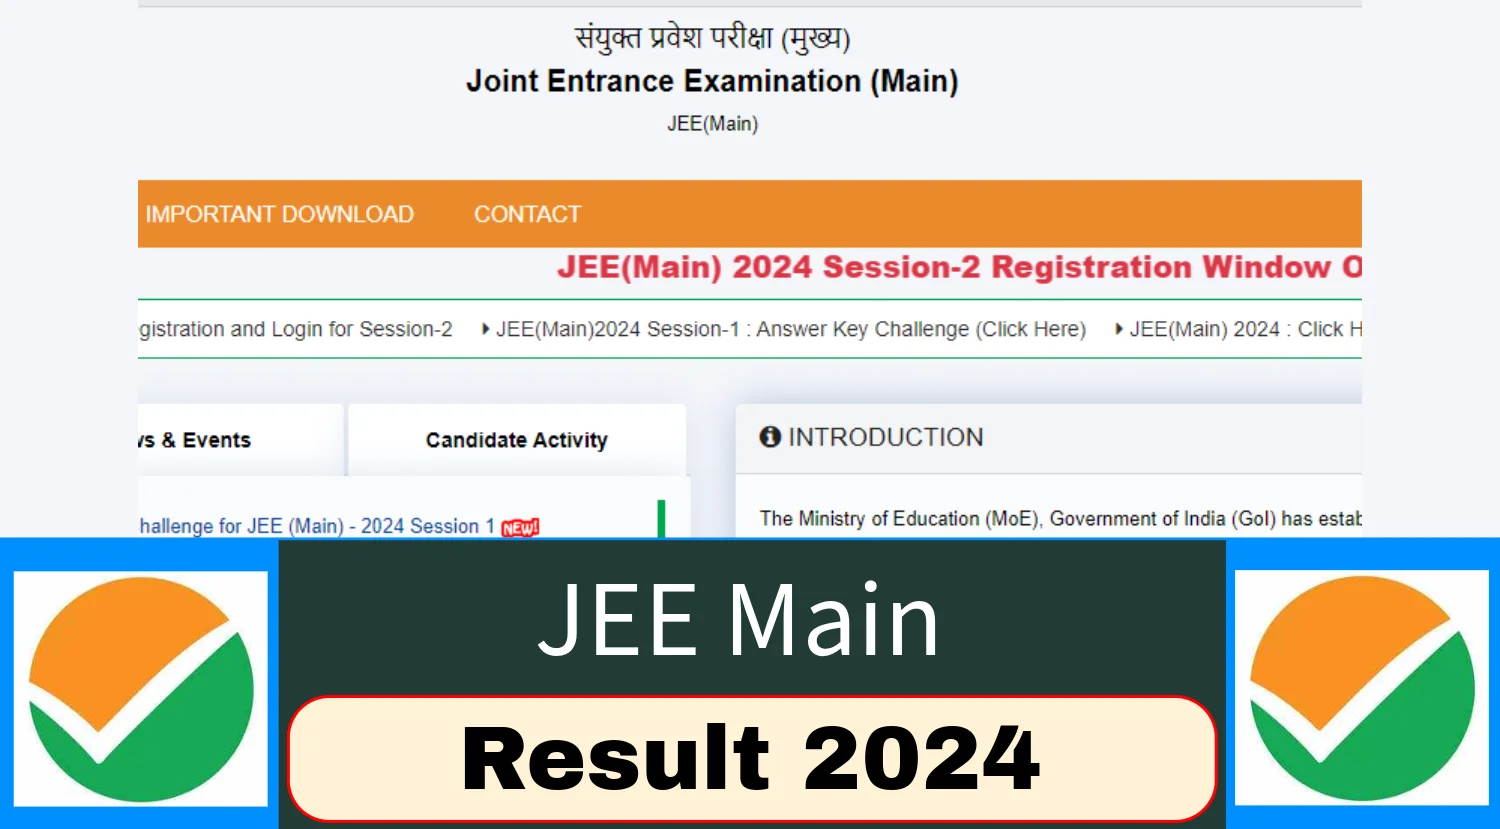 JEE Main Result 2024 Out Today, Check Your Score Form the direct Link Given Here